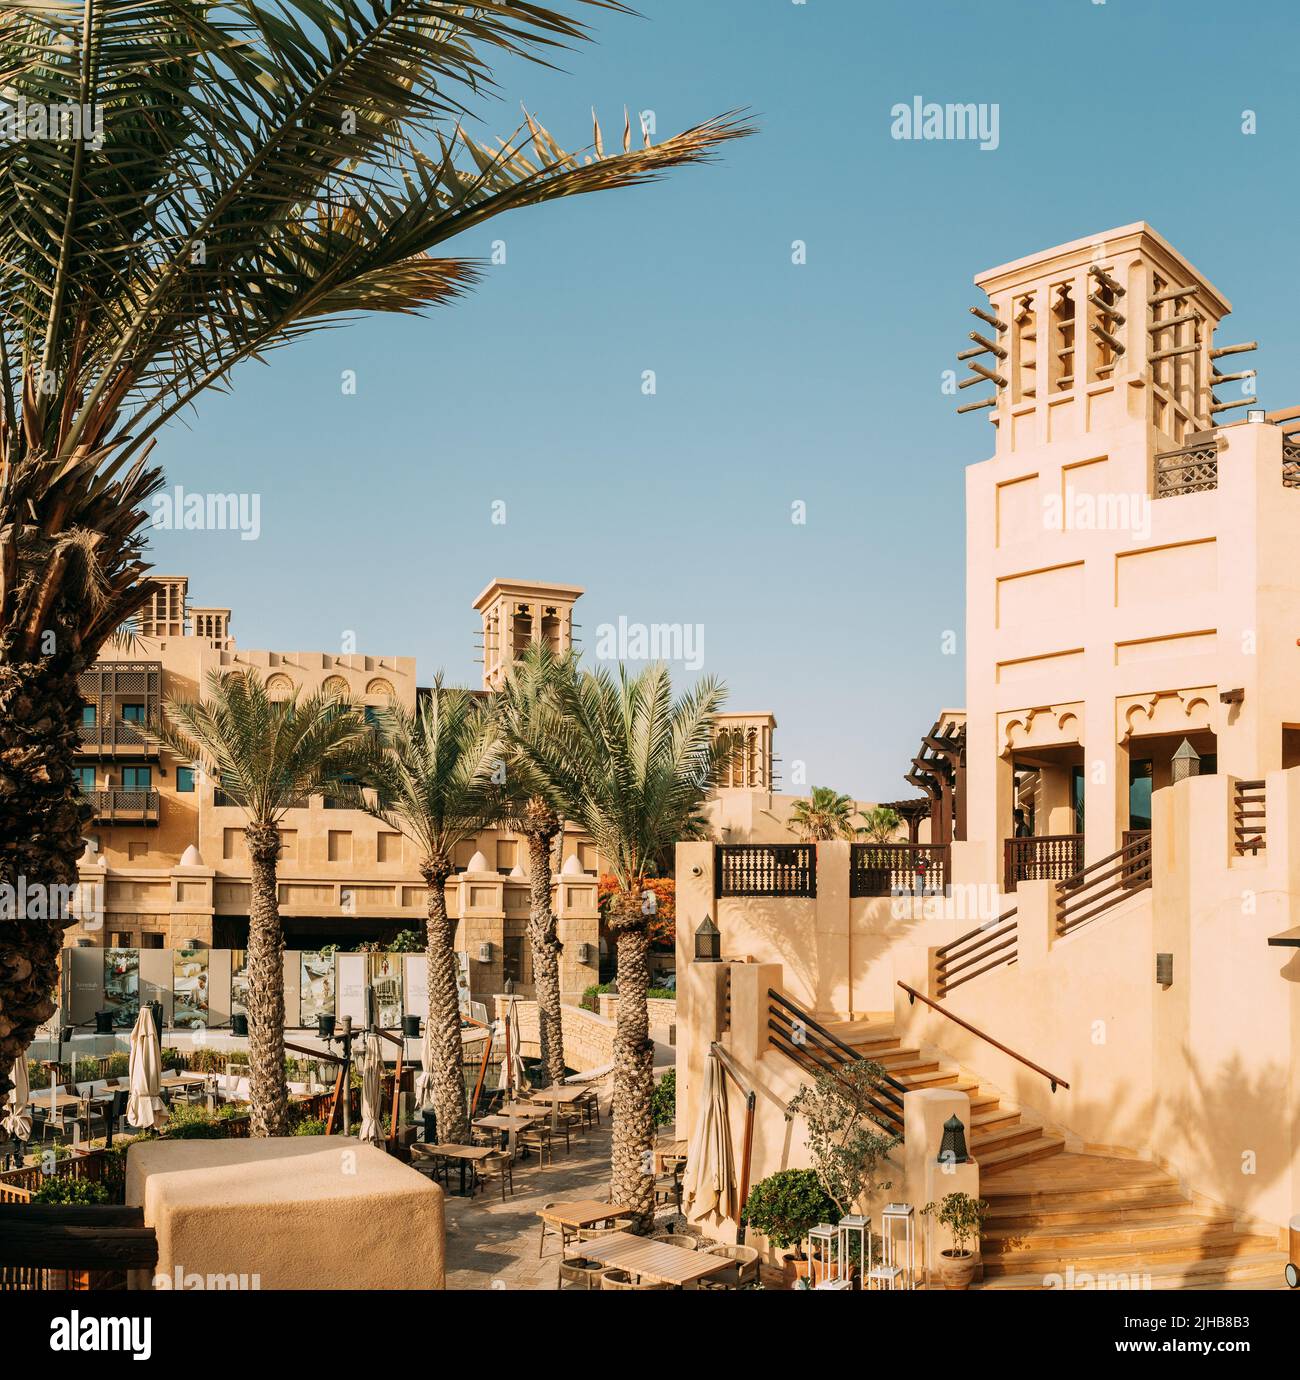 Dubai, UAE, United Arab Emirates - May 25, 2021: View of Madinat Jumeirah Arabian Resort. It is the largest resort in the Emirate. View of windcatcher Stock Photo